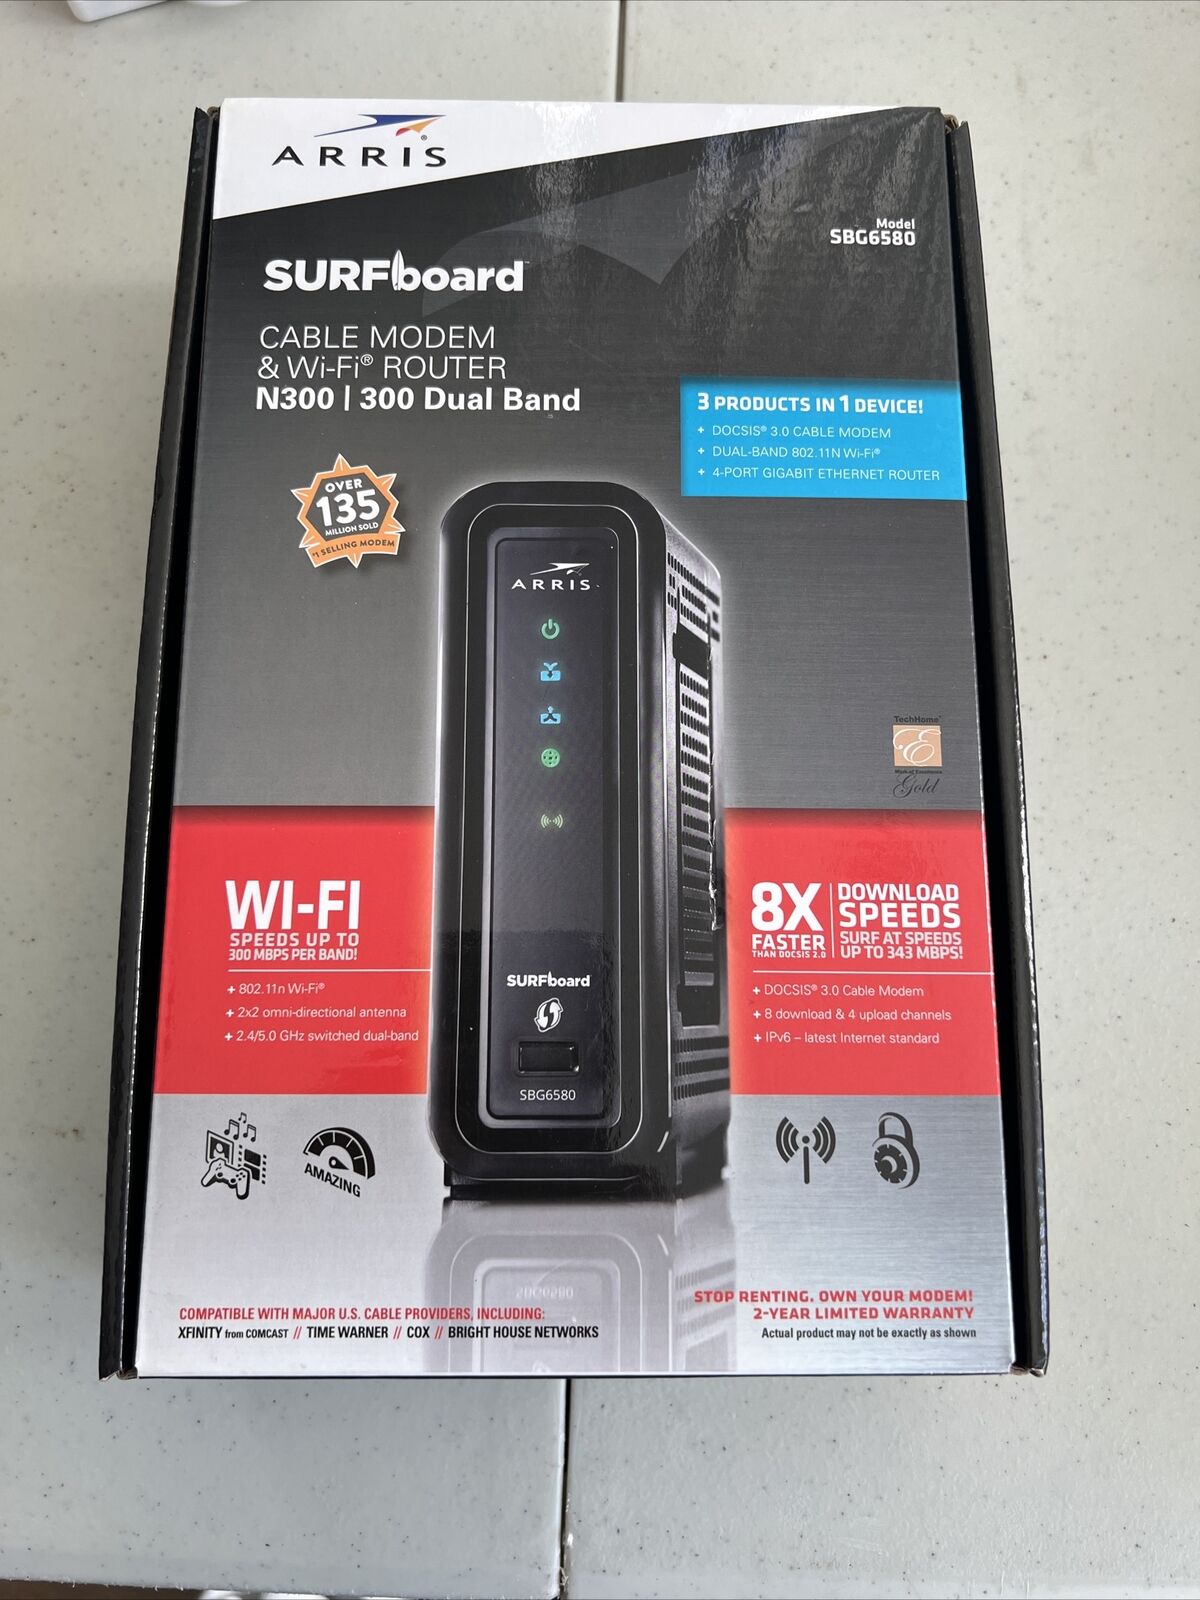 ARRIS Surfboard SBG-6580 N300/300 Dual Band Wireless Cable Modem & WI-FI Router